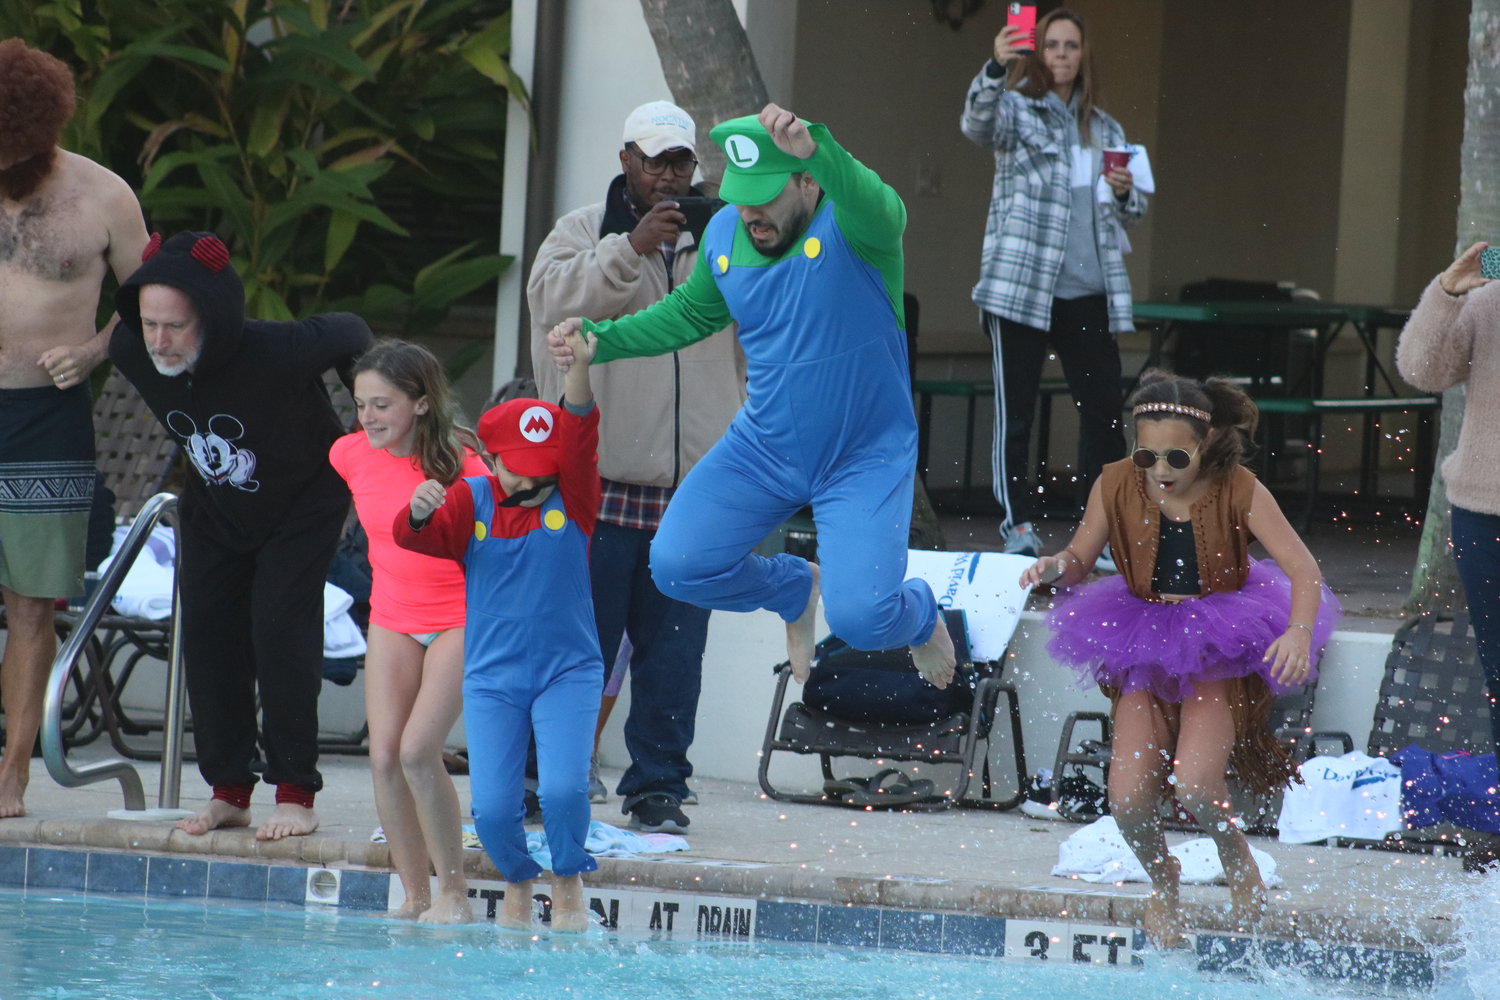 The 13th Annual Nocatee Polar Plunge was held Jan. 8 at Nocatee Splash Water Park. Many residents welcomed the new year by dressing up in costumes and diving into the water park’s main pool.